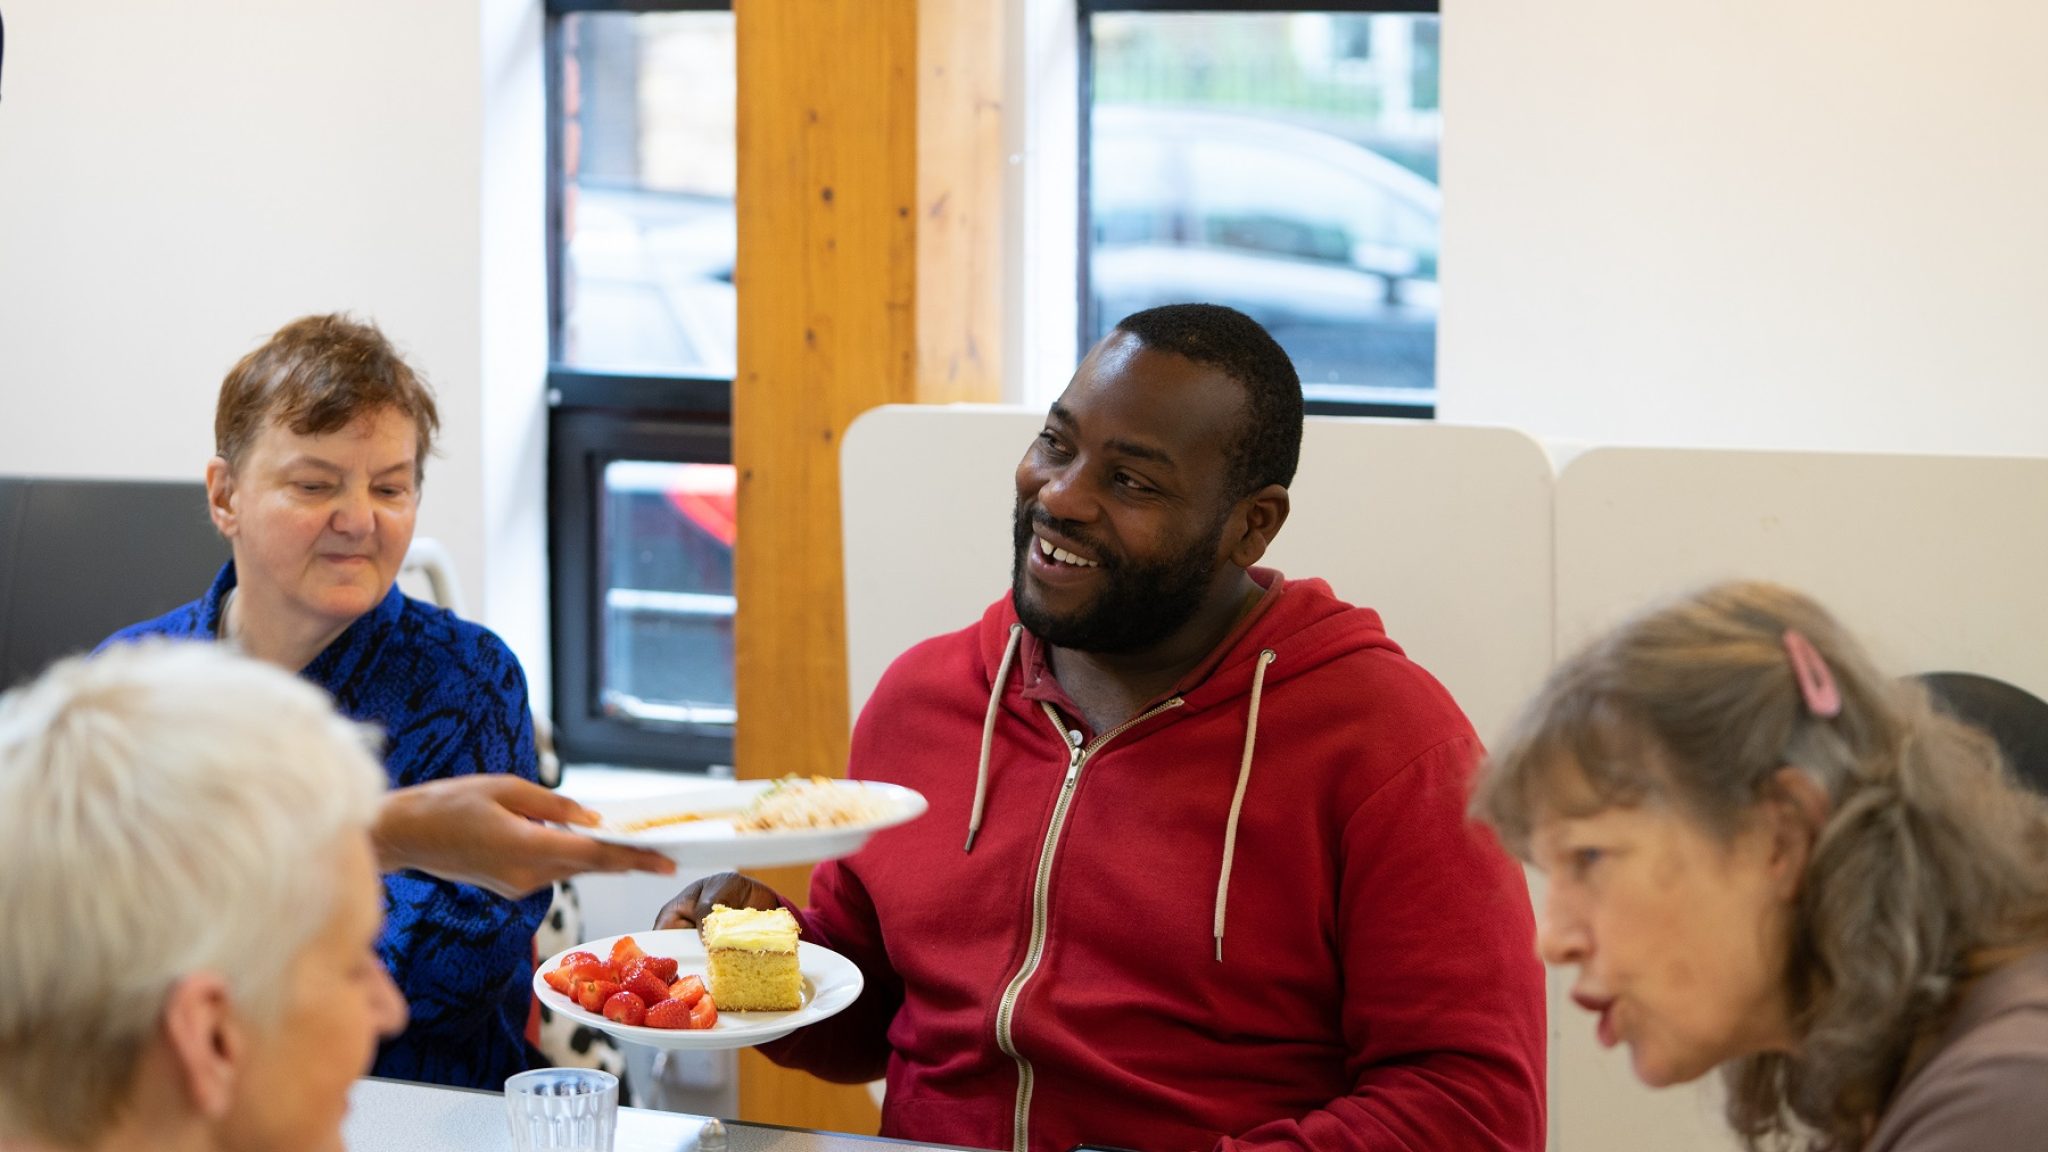 A smiling man accepts a place of cake and strawberries in a community cafe. He is sitting at a table with other people who are chatting to each other.